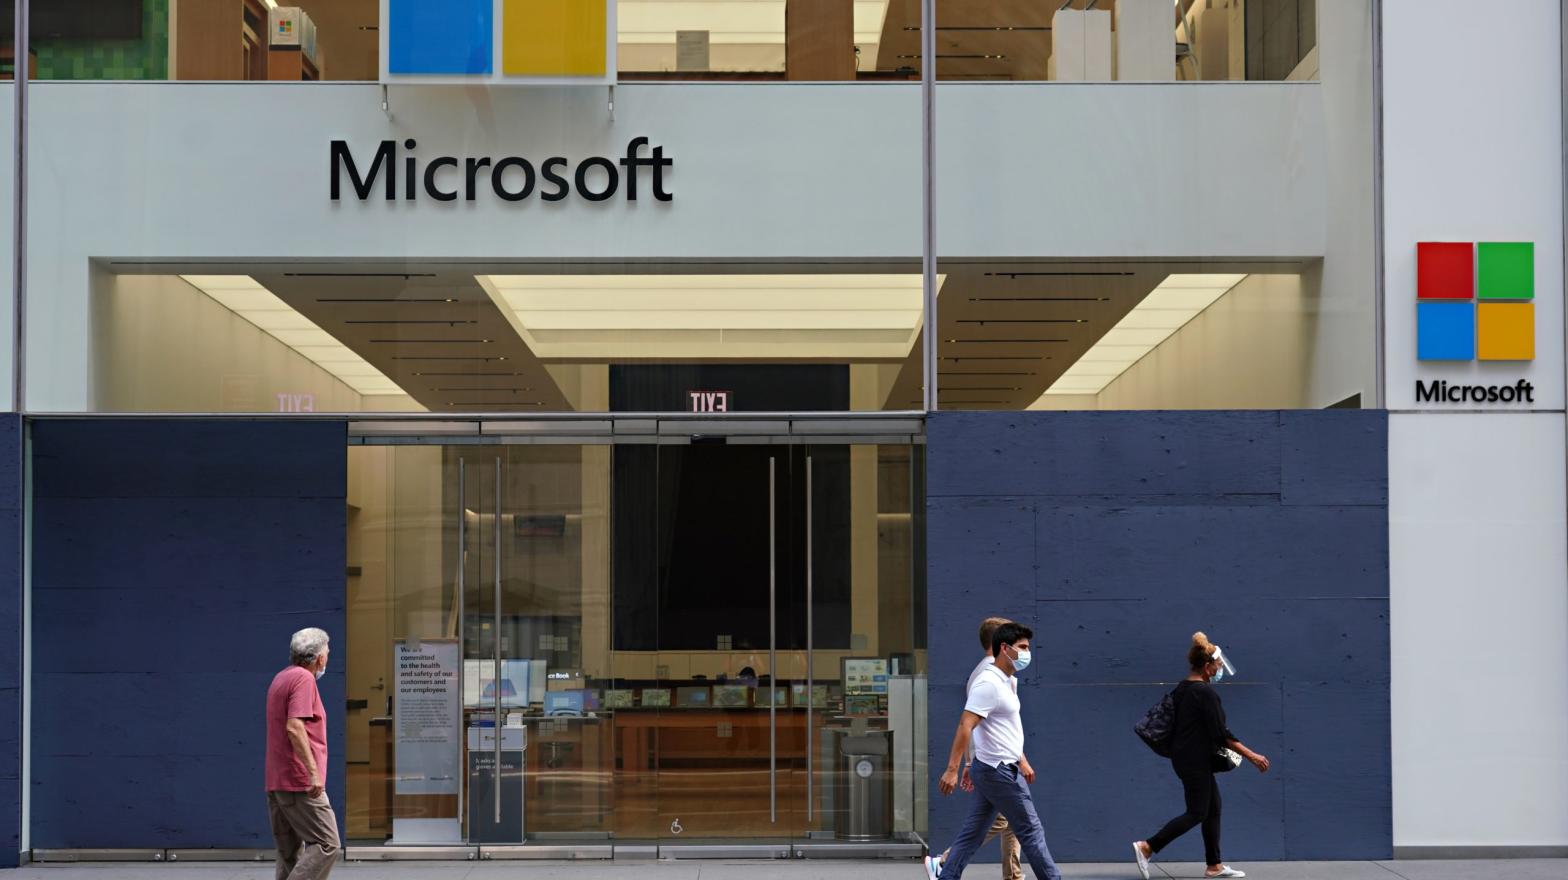 A Microsoft store on Aug. 3, 2020 in New York. (Photo: Cindy Ord, Getty Images)